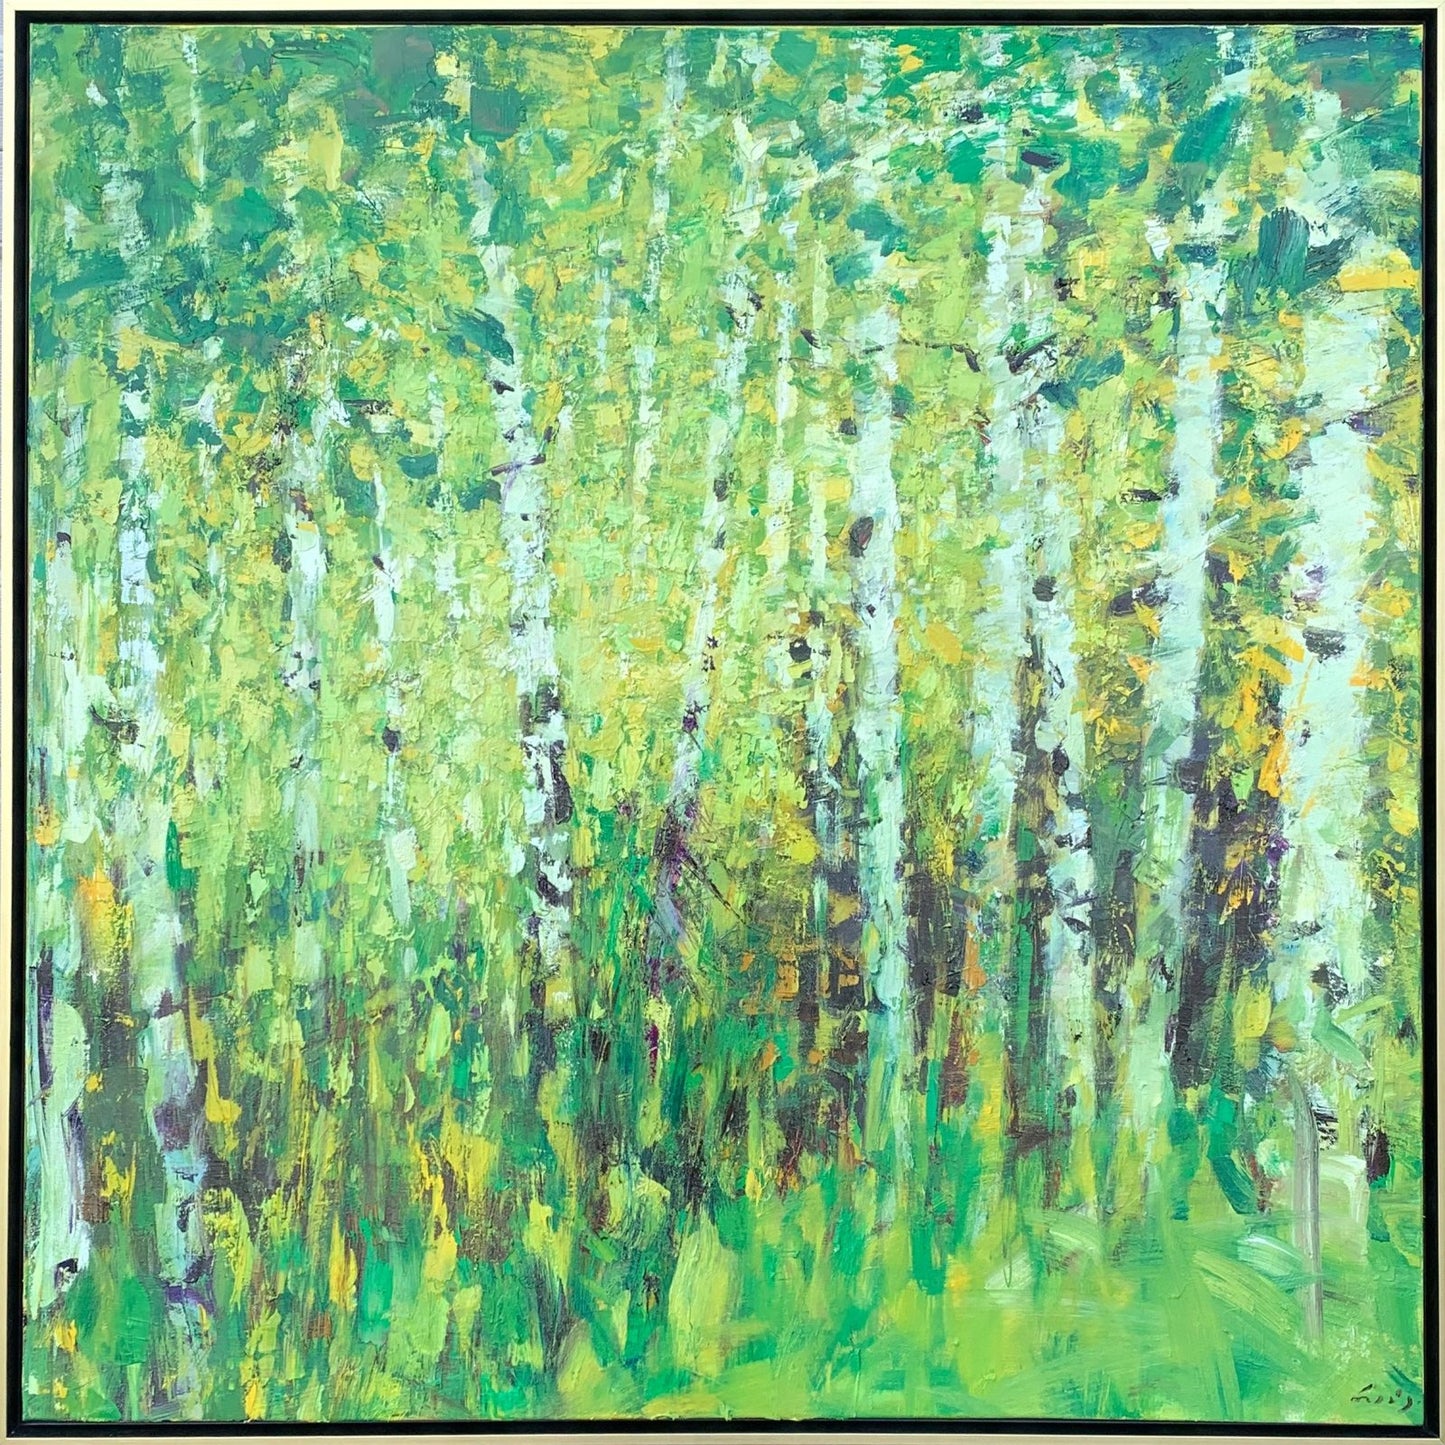 Birch by Ning Lee at LePrince Galleries